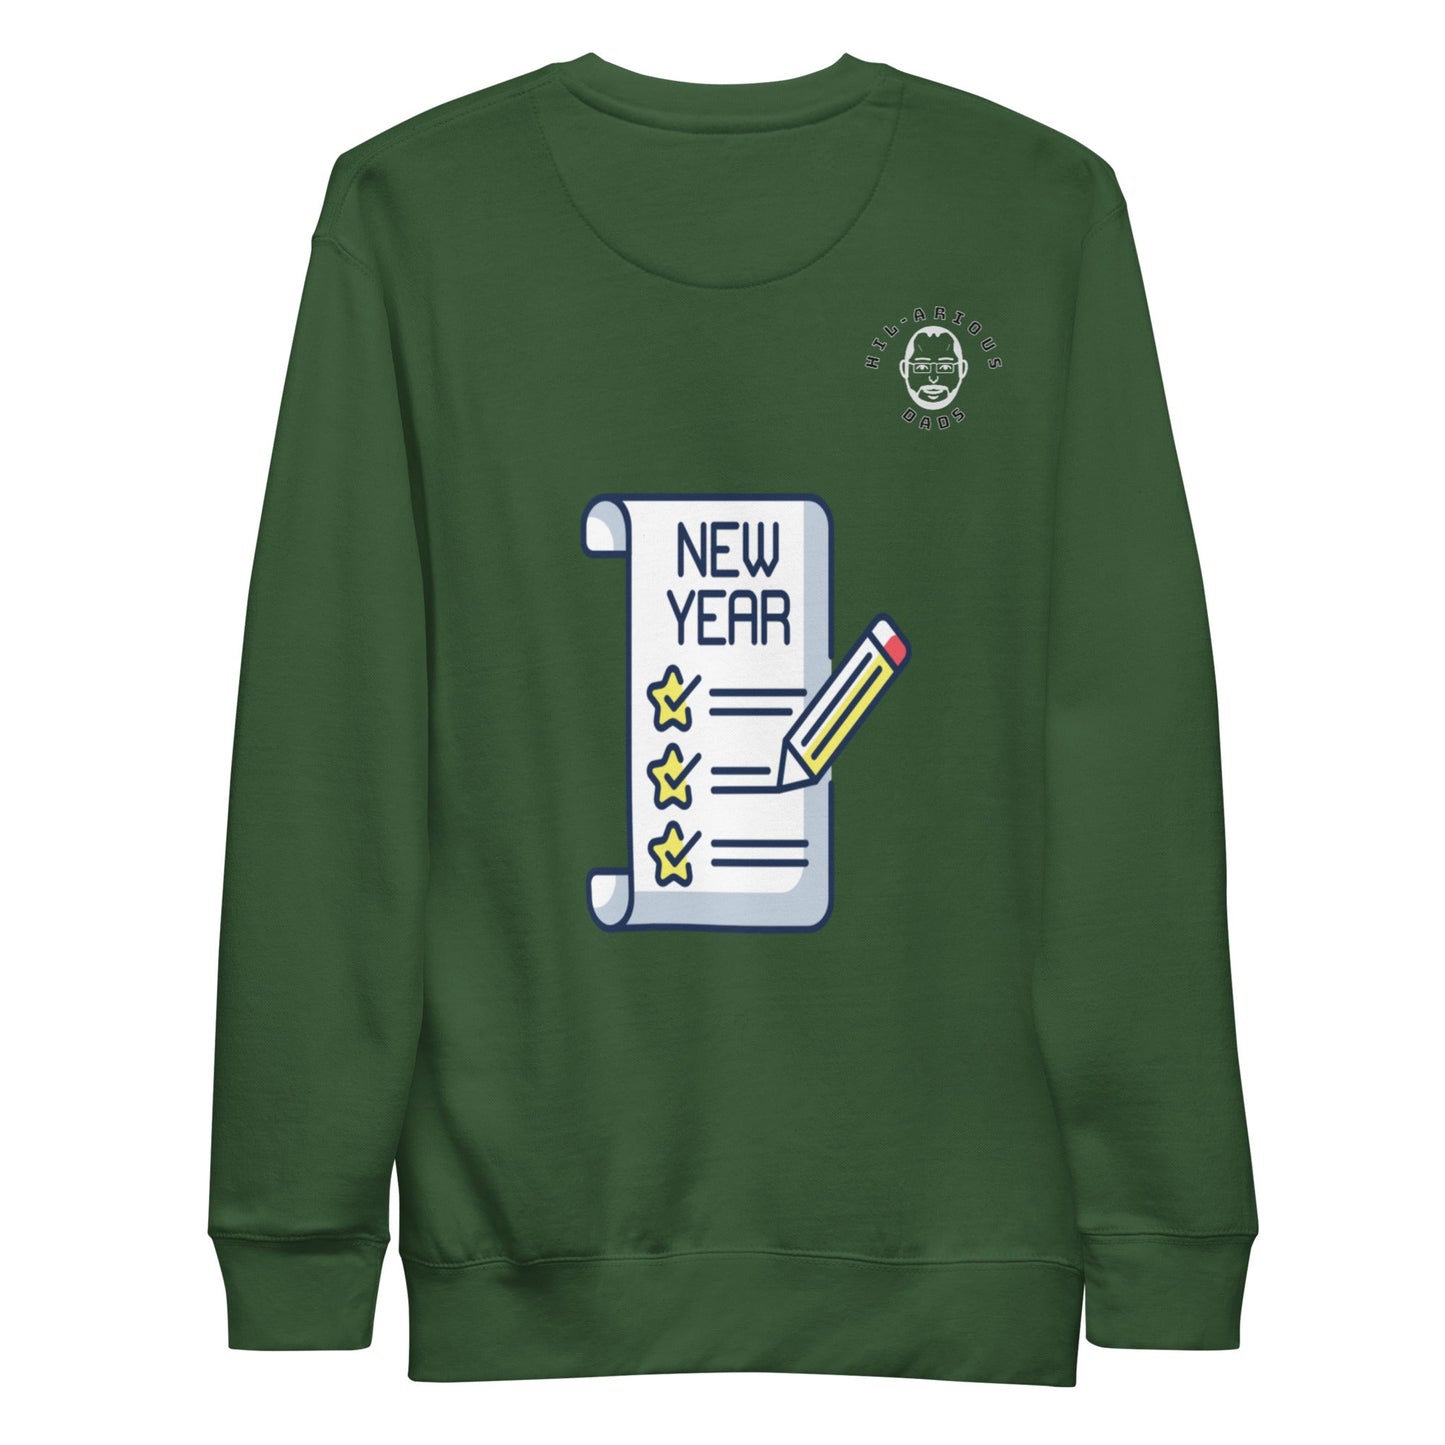 New Year Resolutions-Sweatshirt - Hil-arious Dads